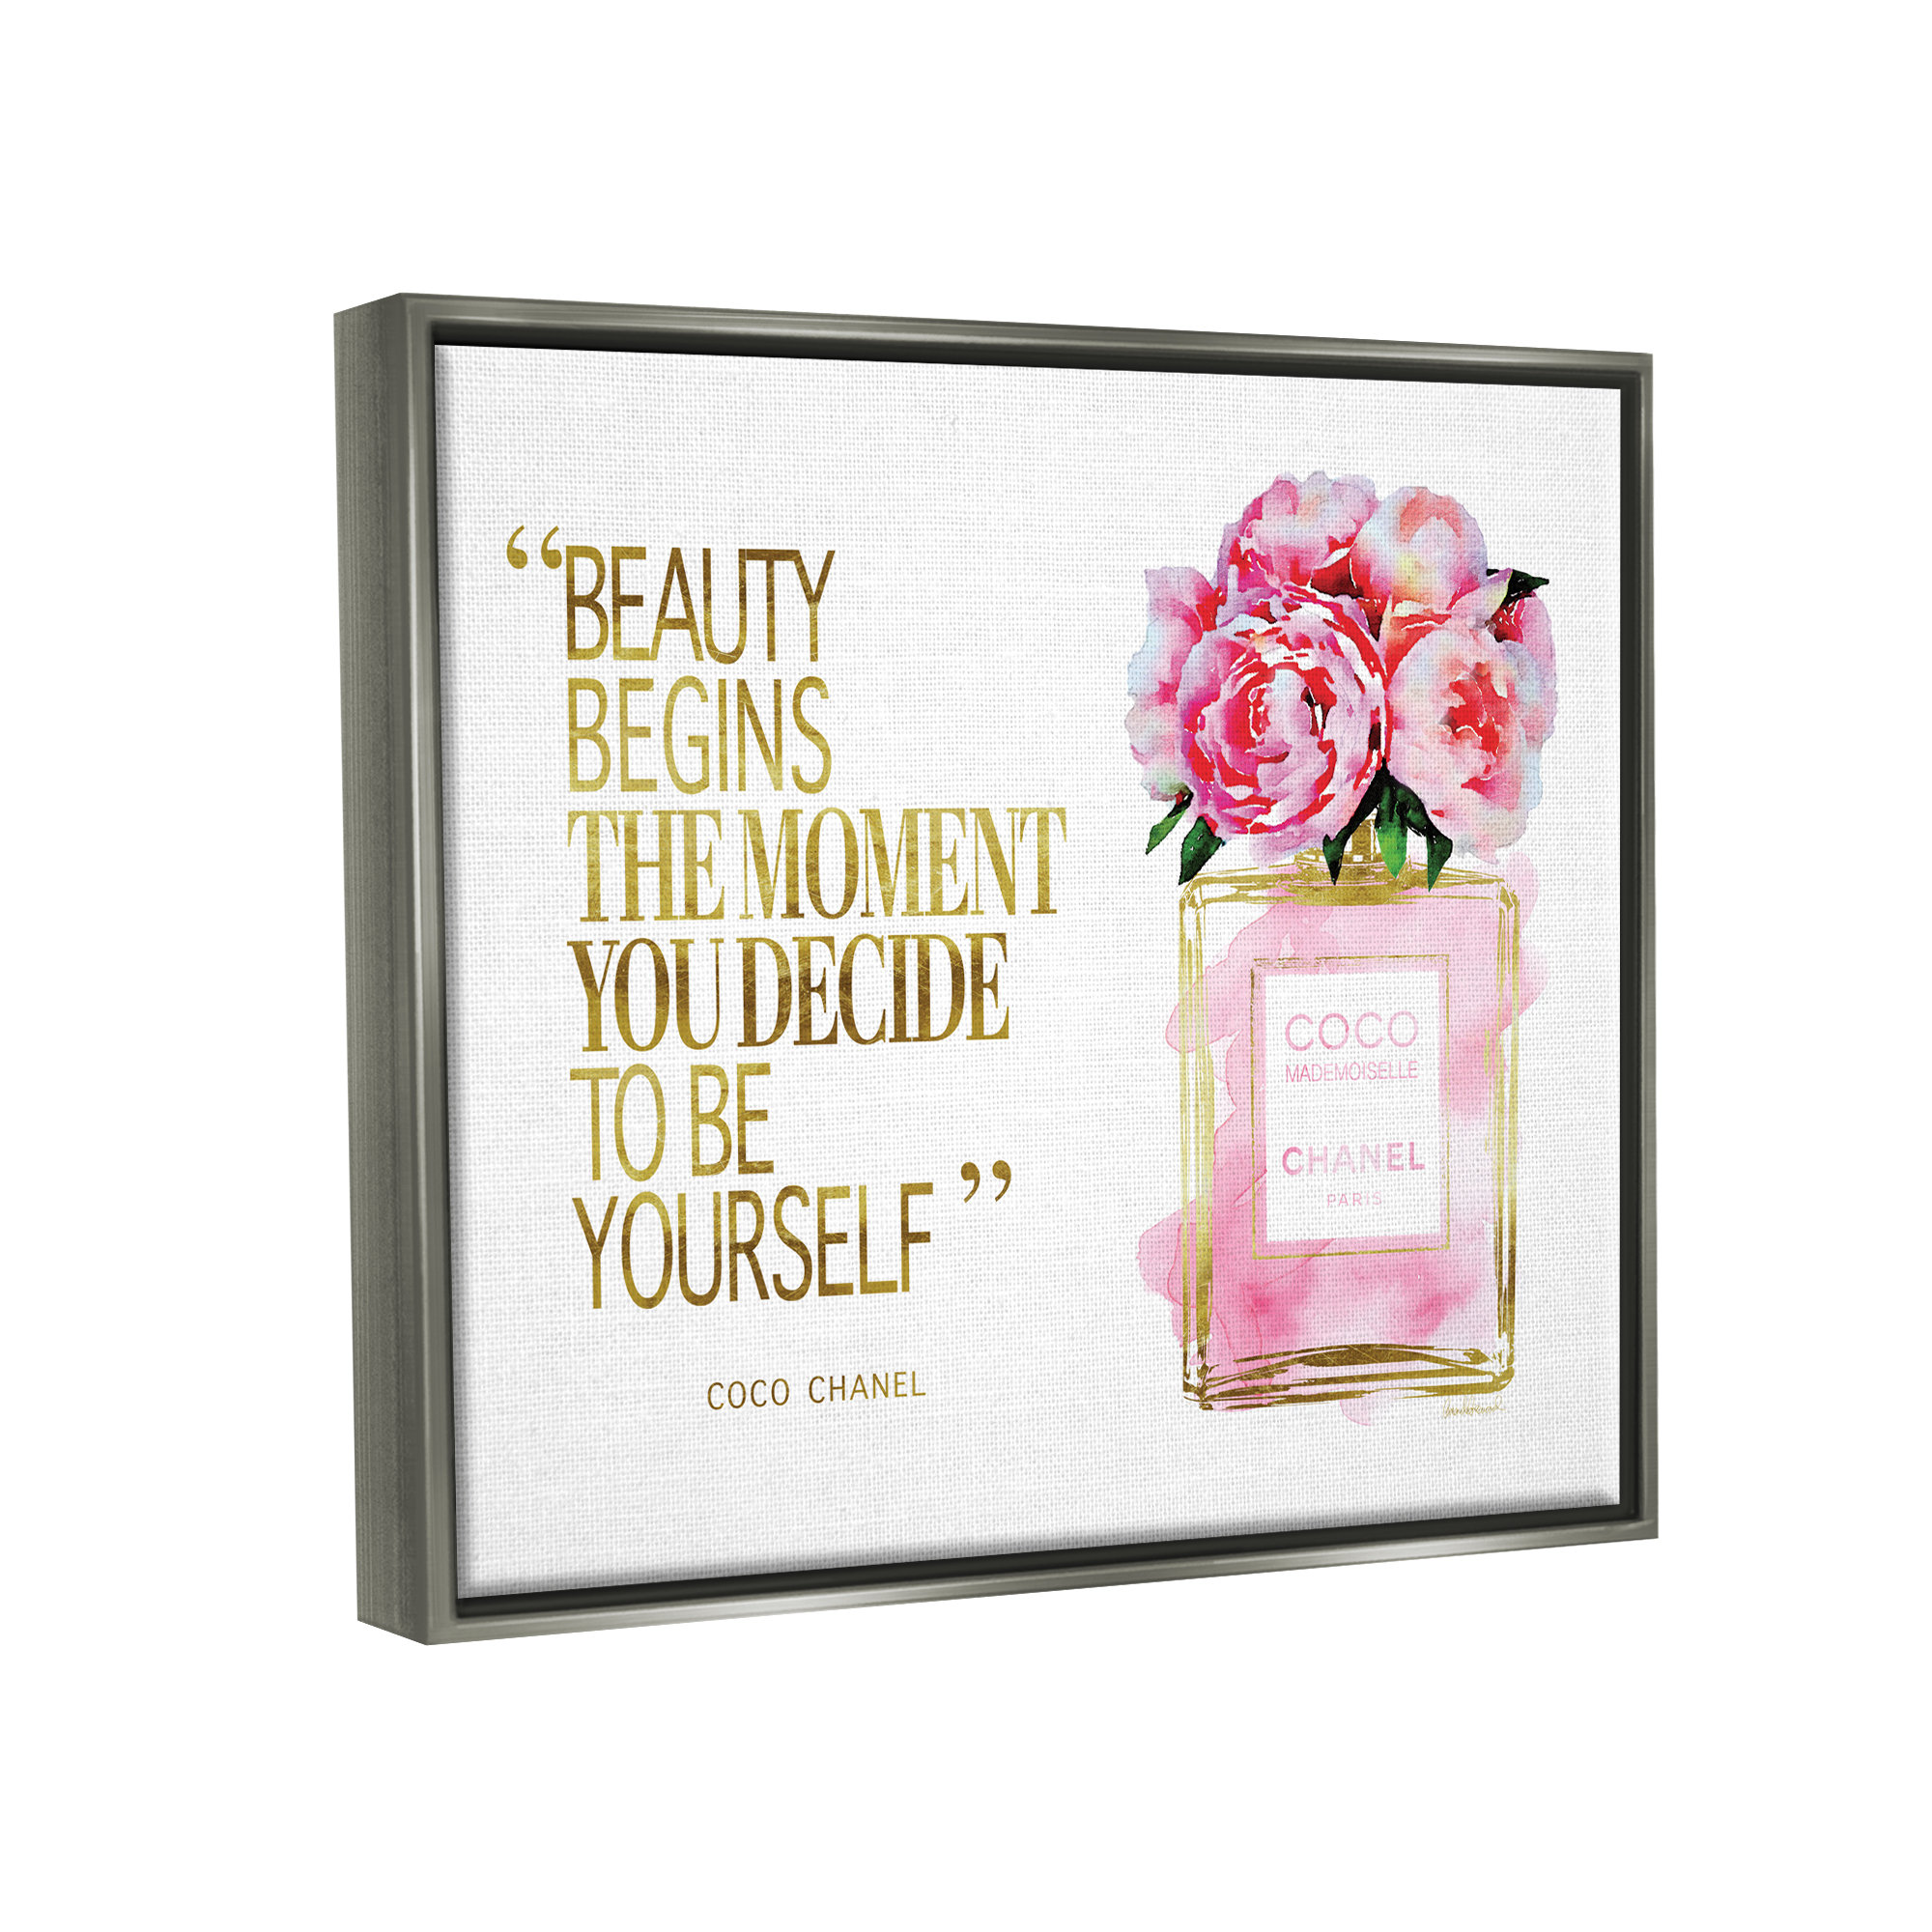 Stupell Industries Fashion Designer Perfume Gold Pink Watercolor  Inspirational Word Framed On Canvas by Amanda Greenwood Print